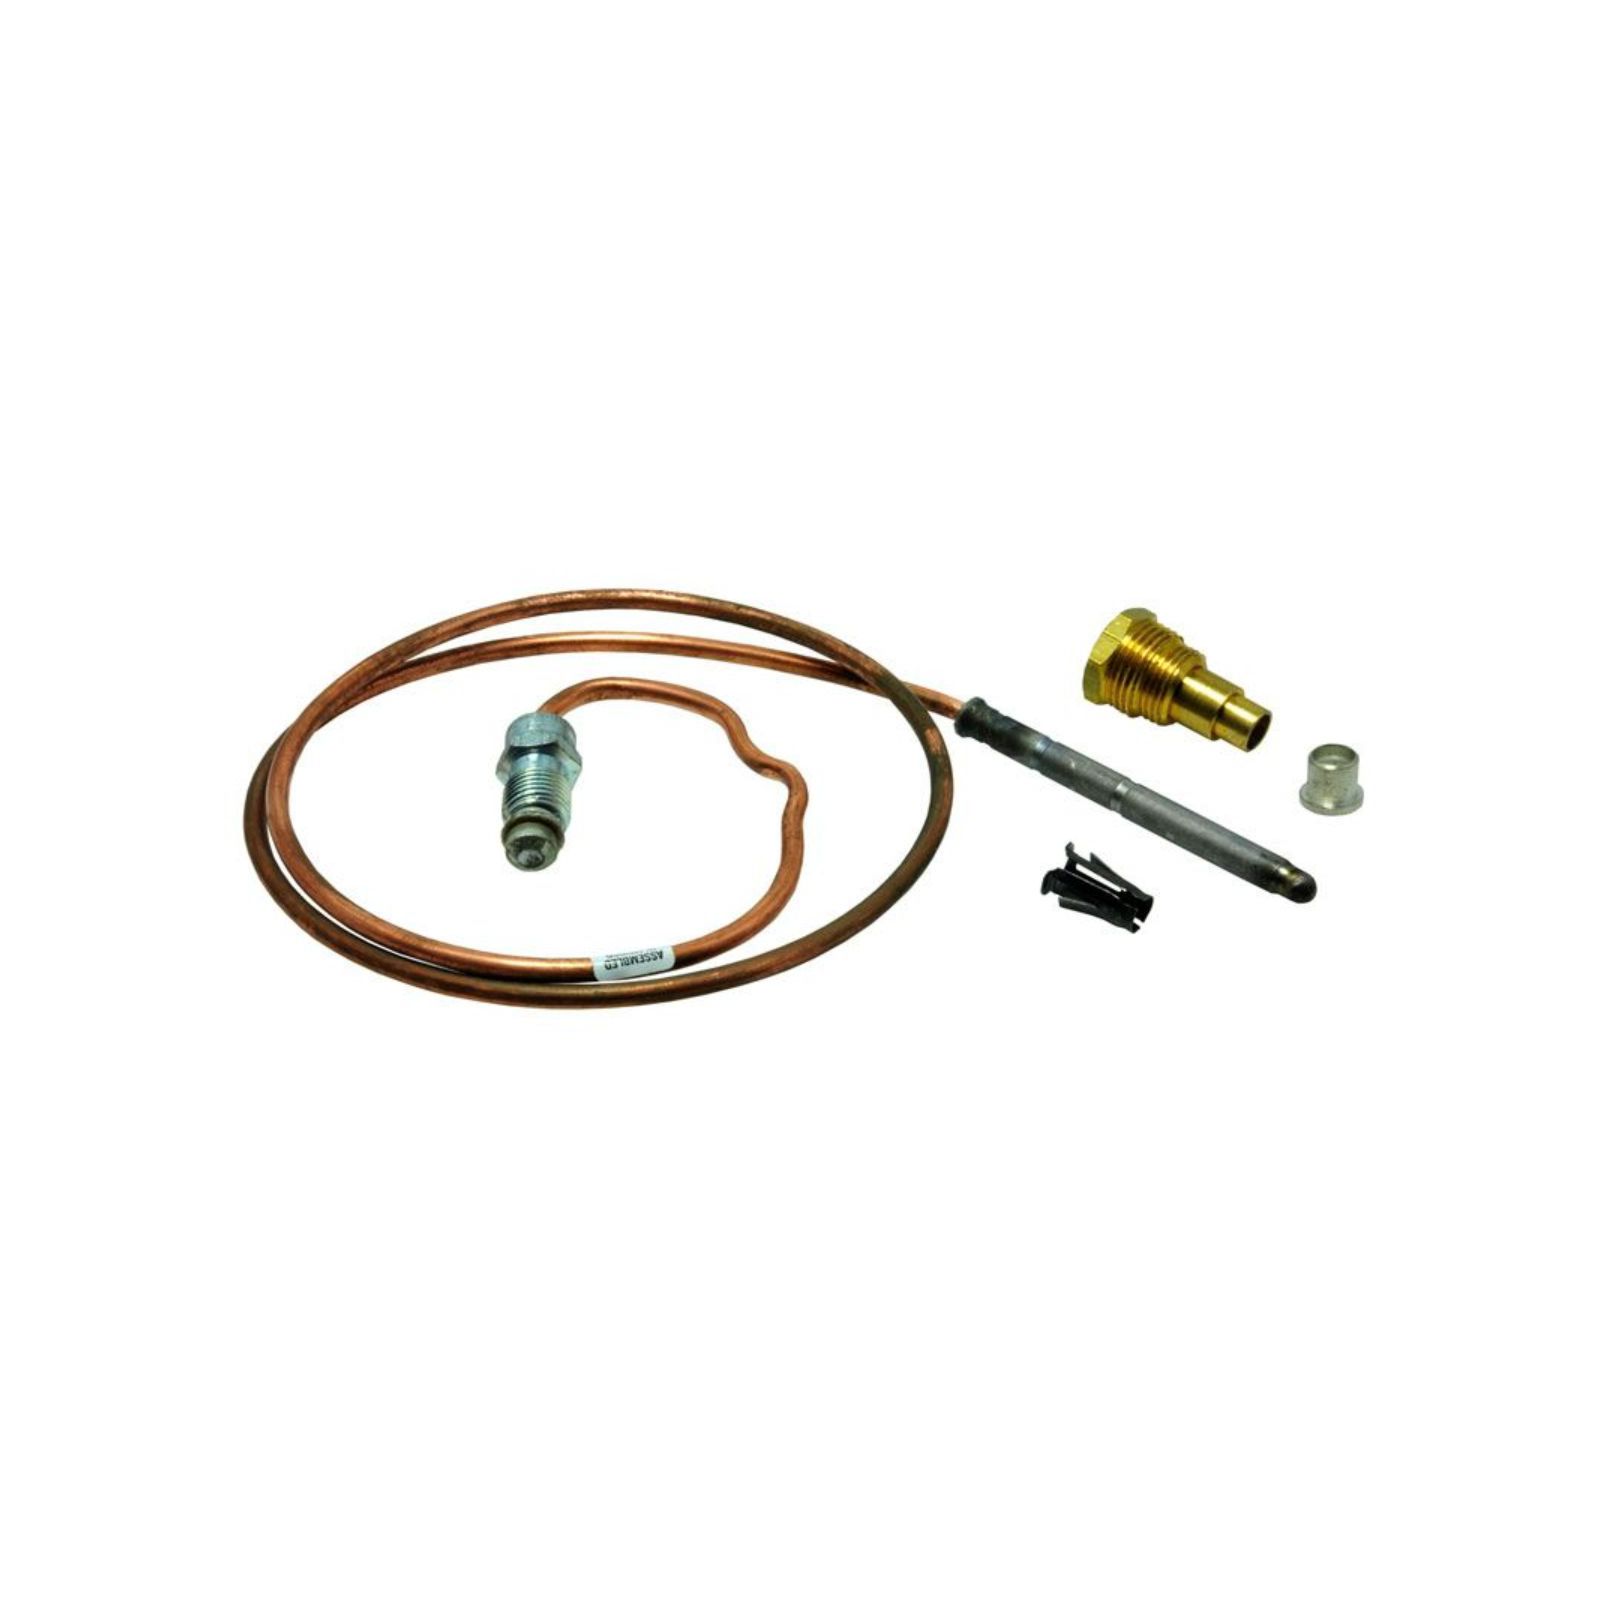 Robertshaw 21724B - Thermocouple, 217 Series, 24" Capillary Tube, Bulb End Connections: Nut, Adapter, Push-in Clip